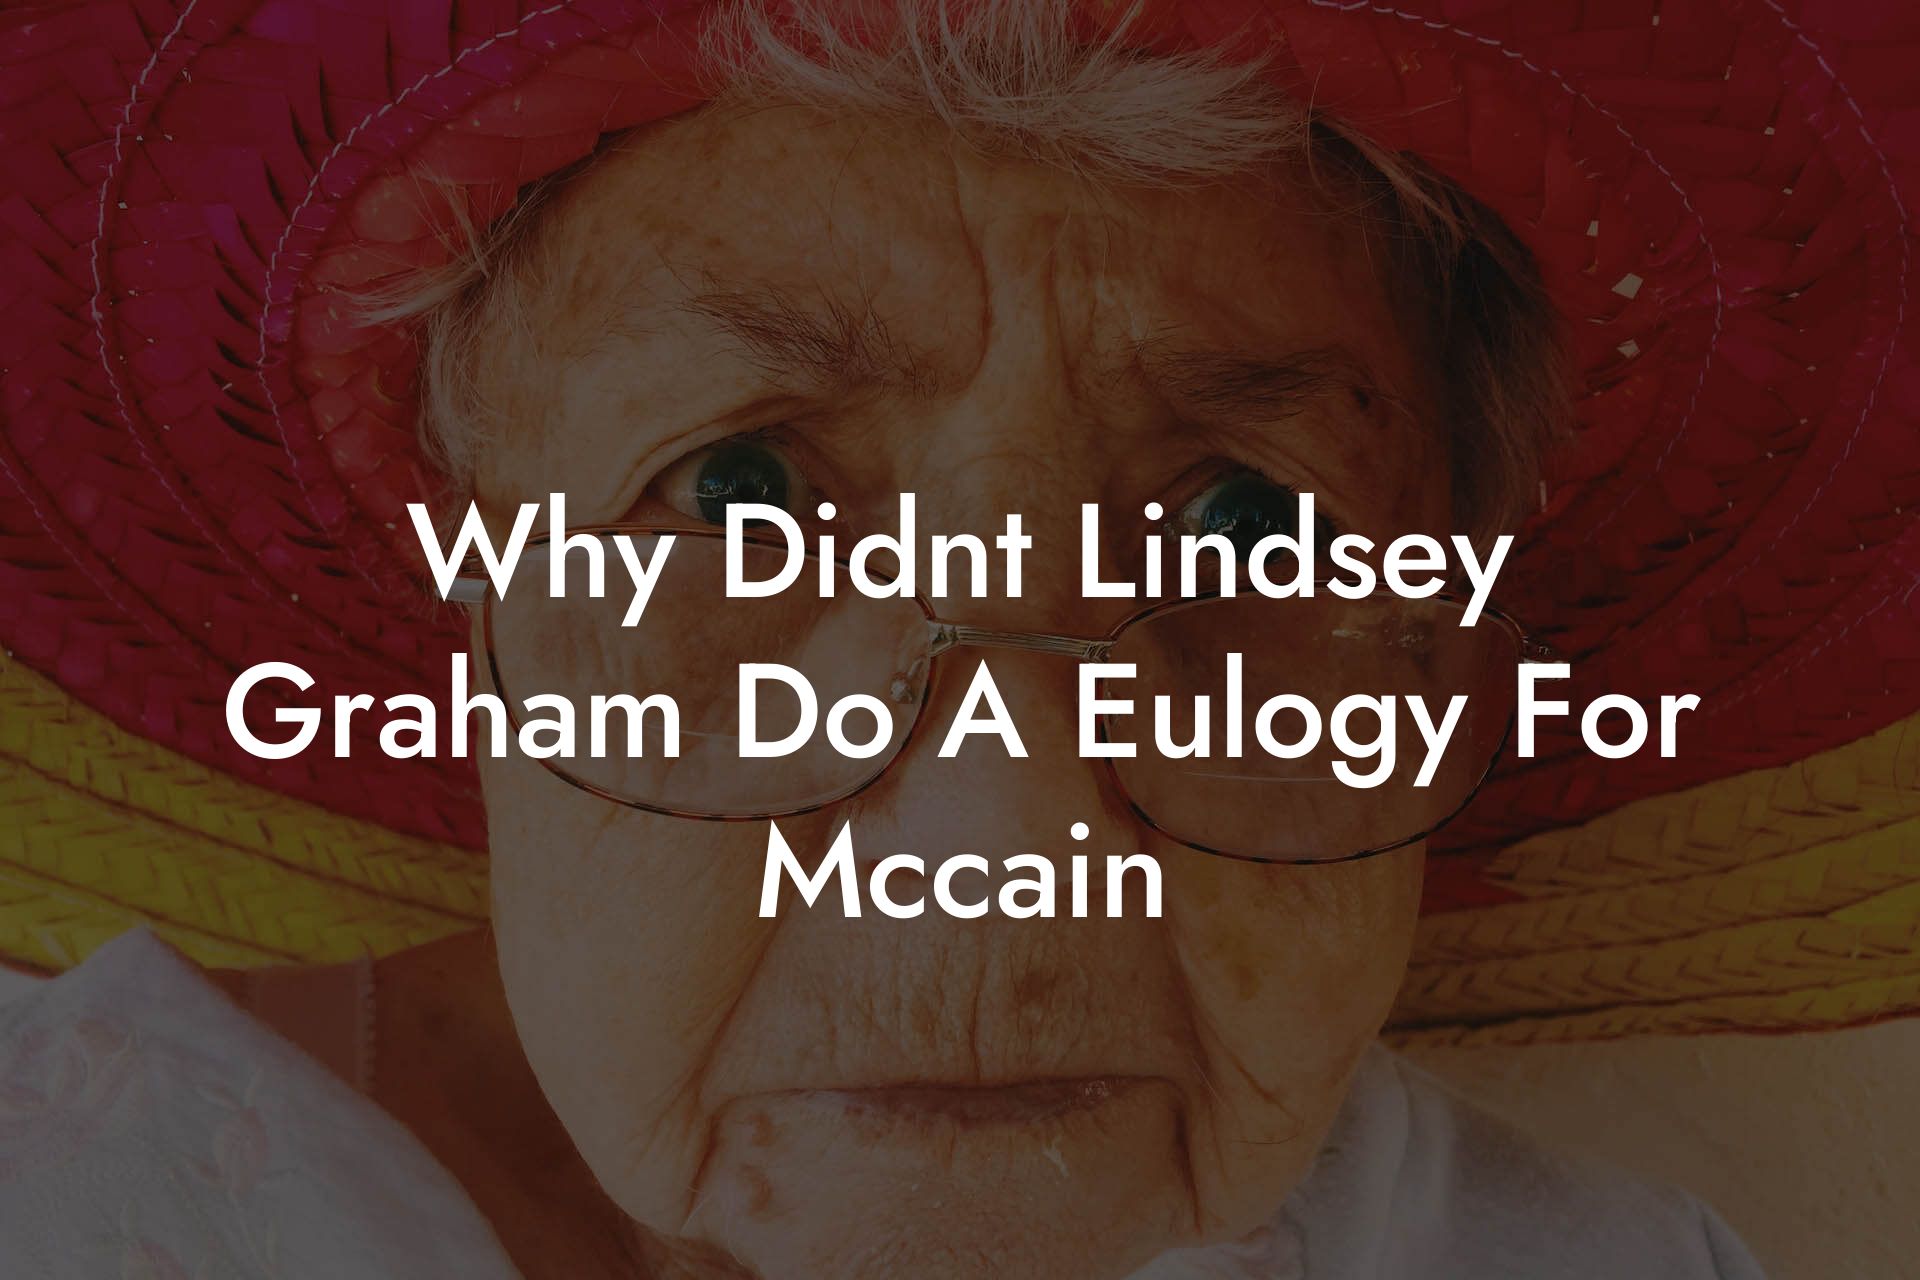 Why Didnt Lindsey Graham Do A Eulogy For Mccain